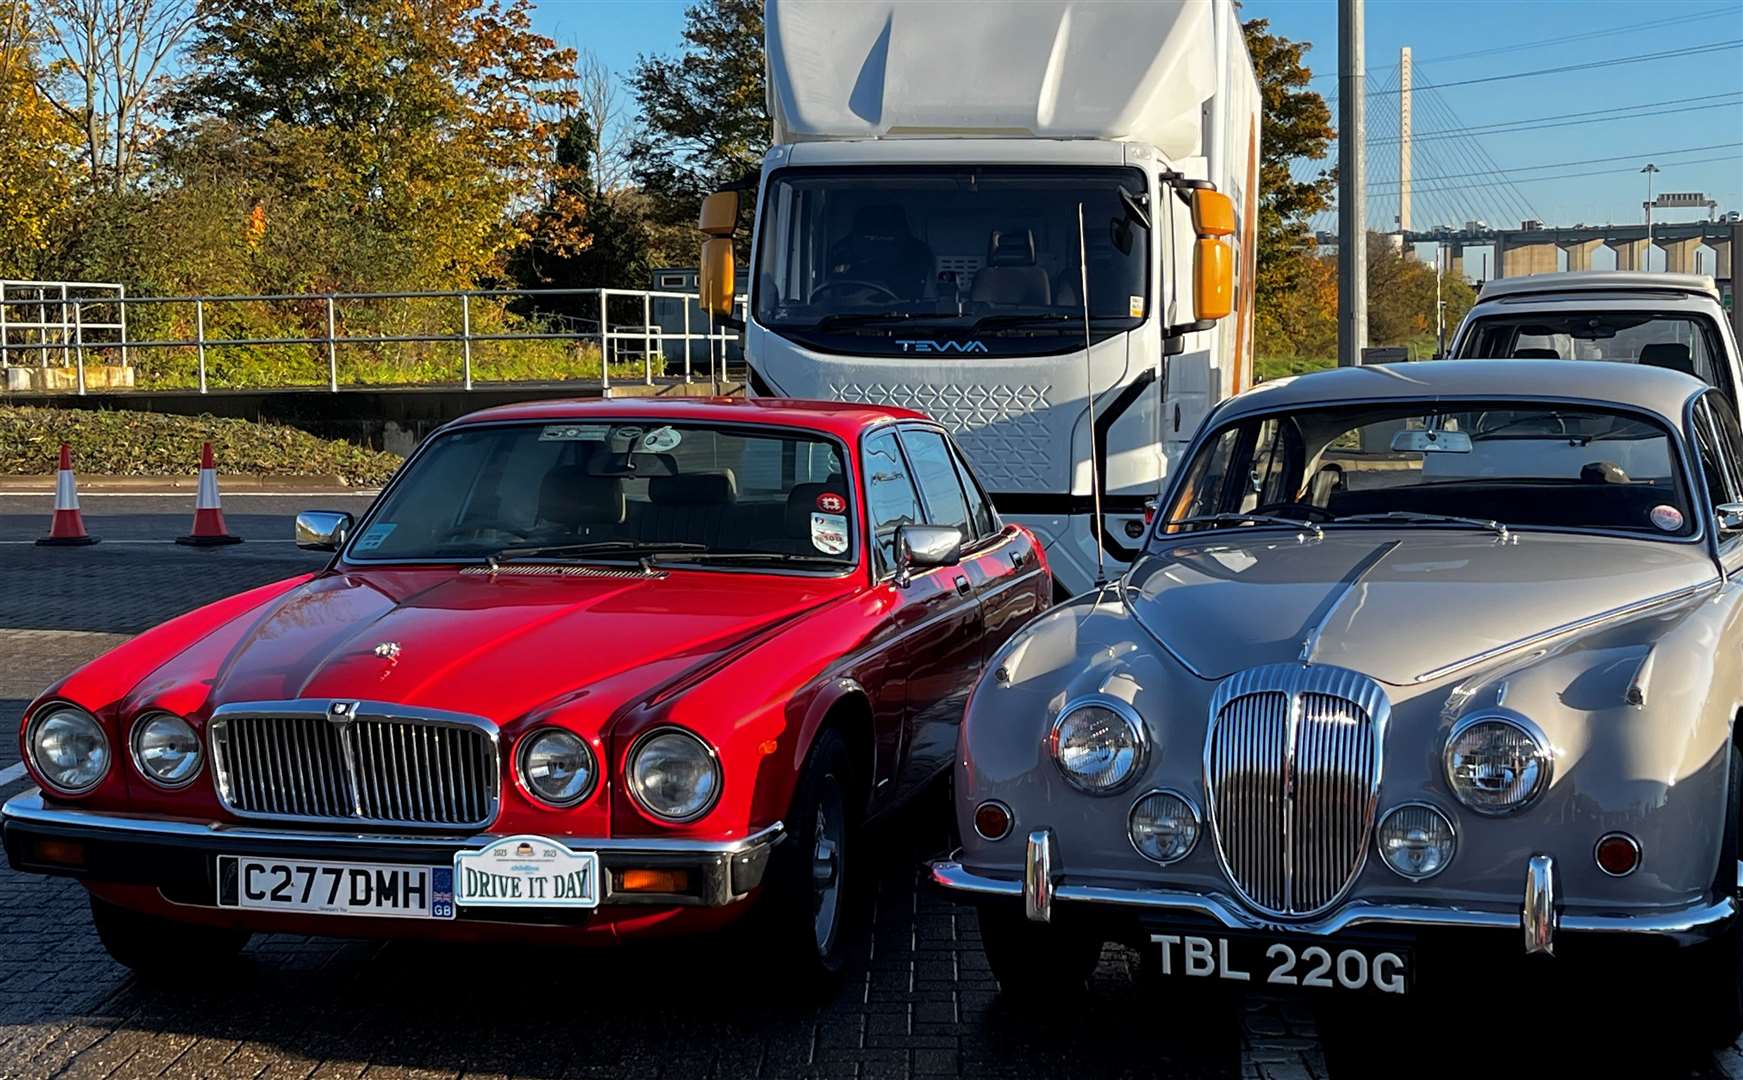 Cars from the past six decades travelled through the Dartford Tunnel